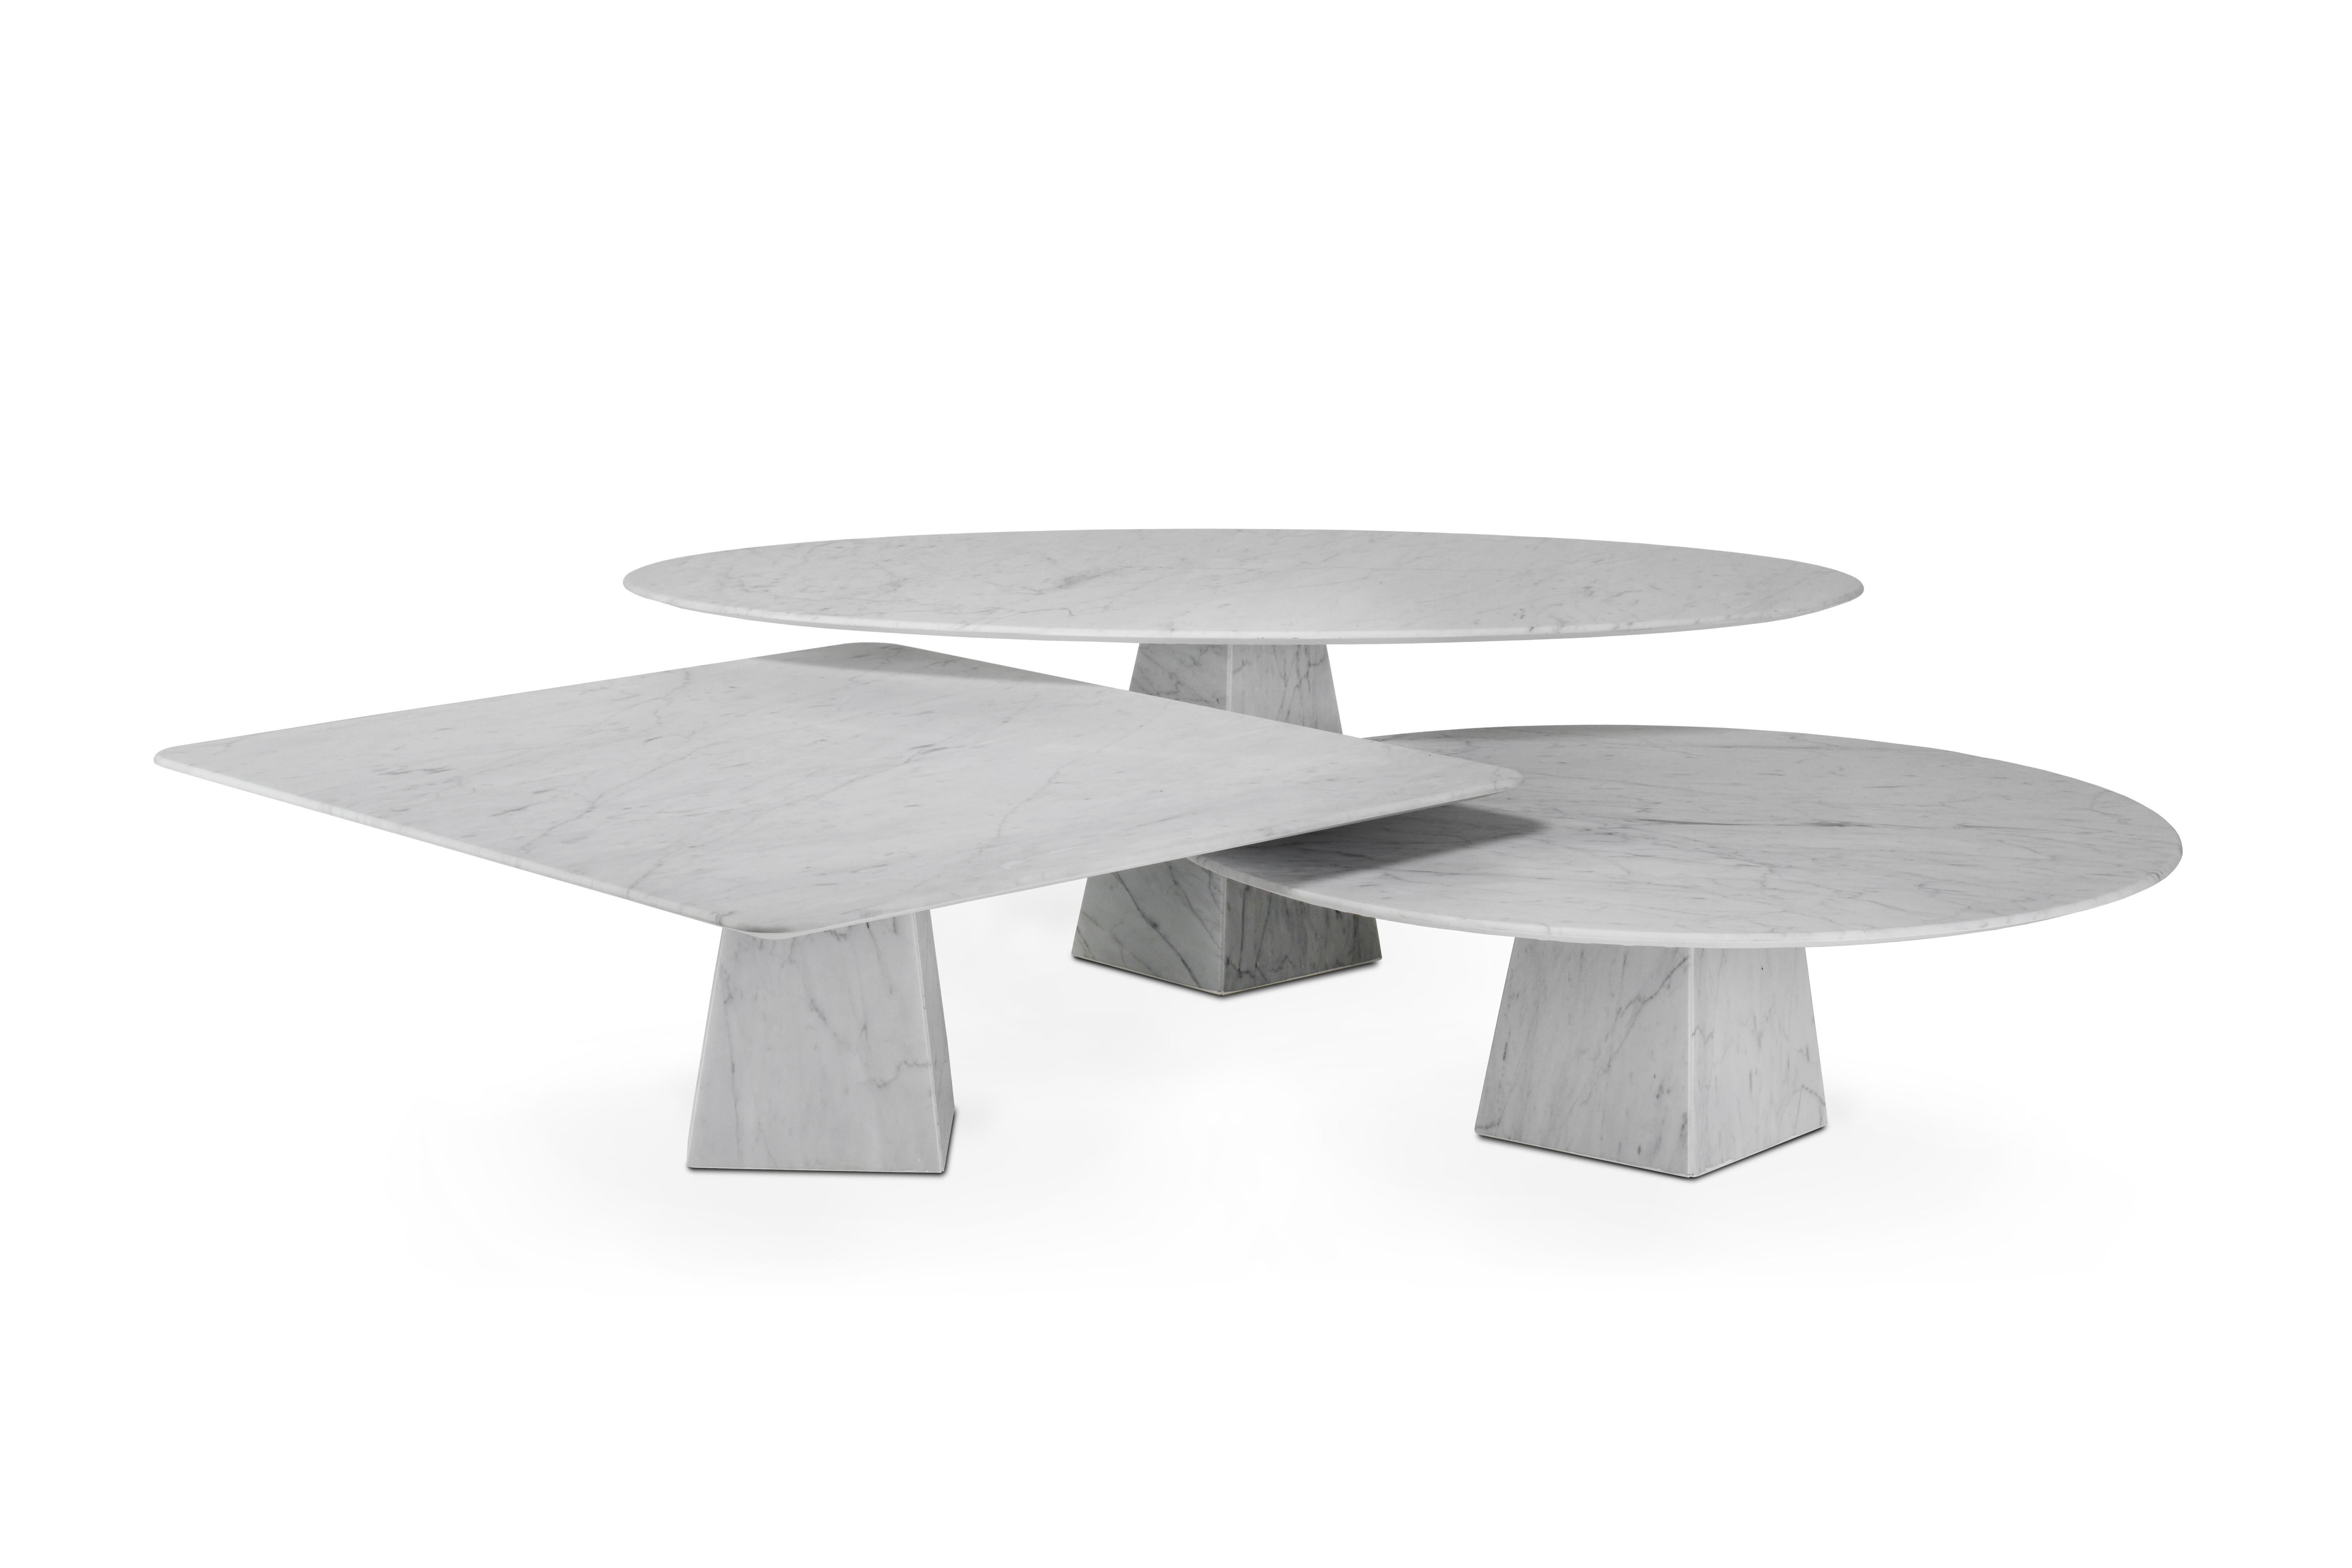 Laminated Ultra Thin White Carrara Marble Squared Coffee Table For Sale